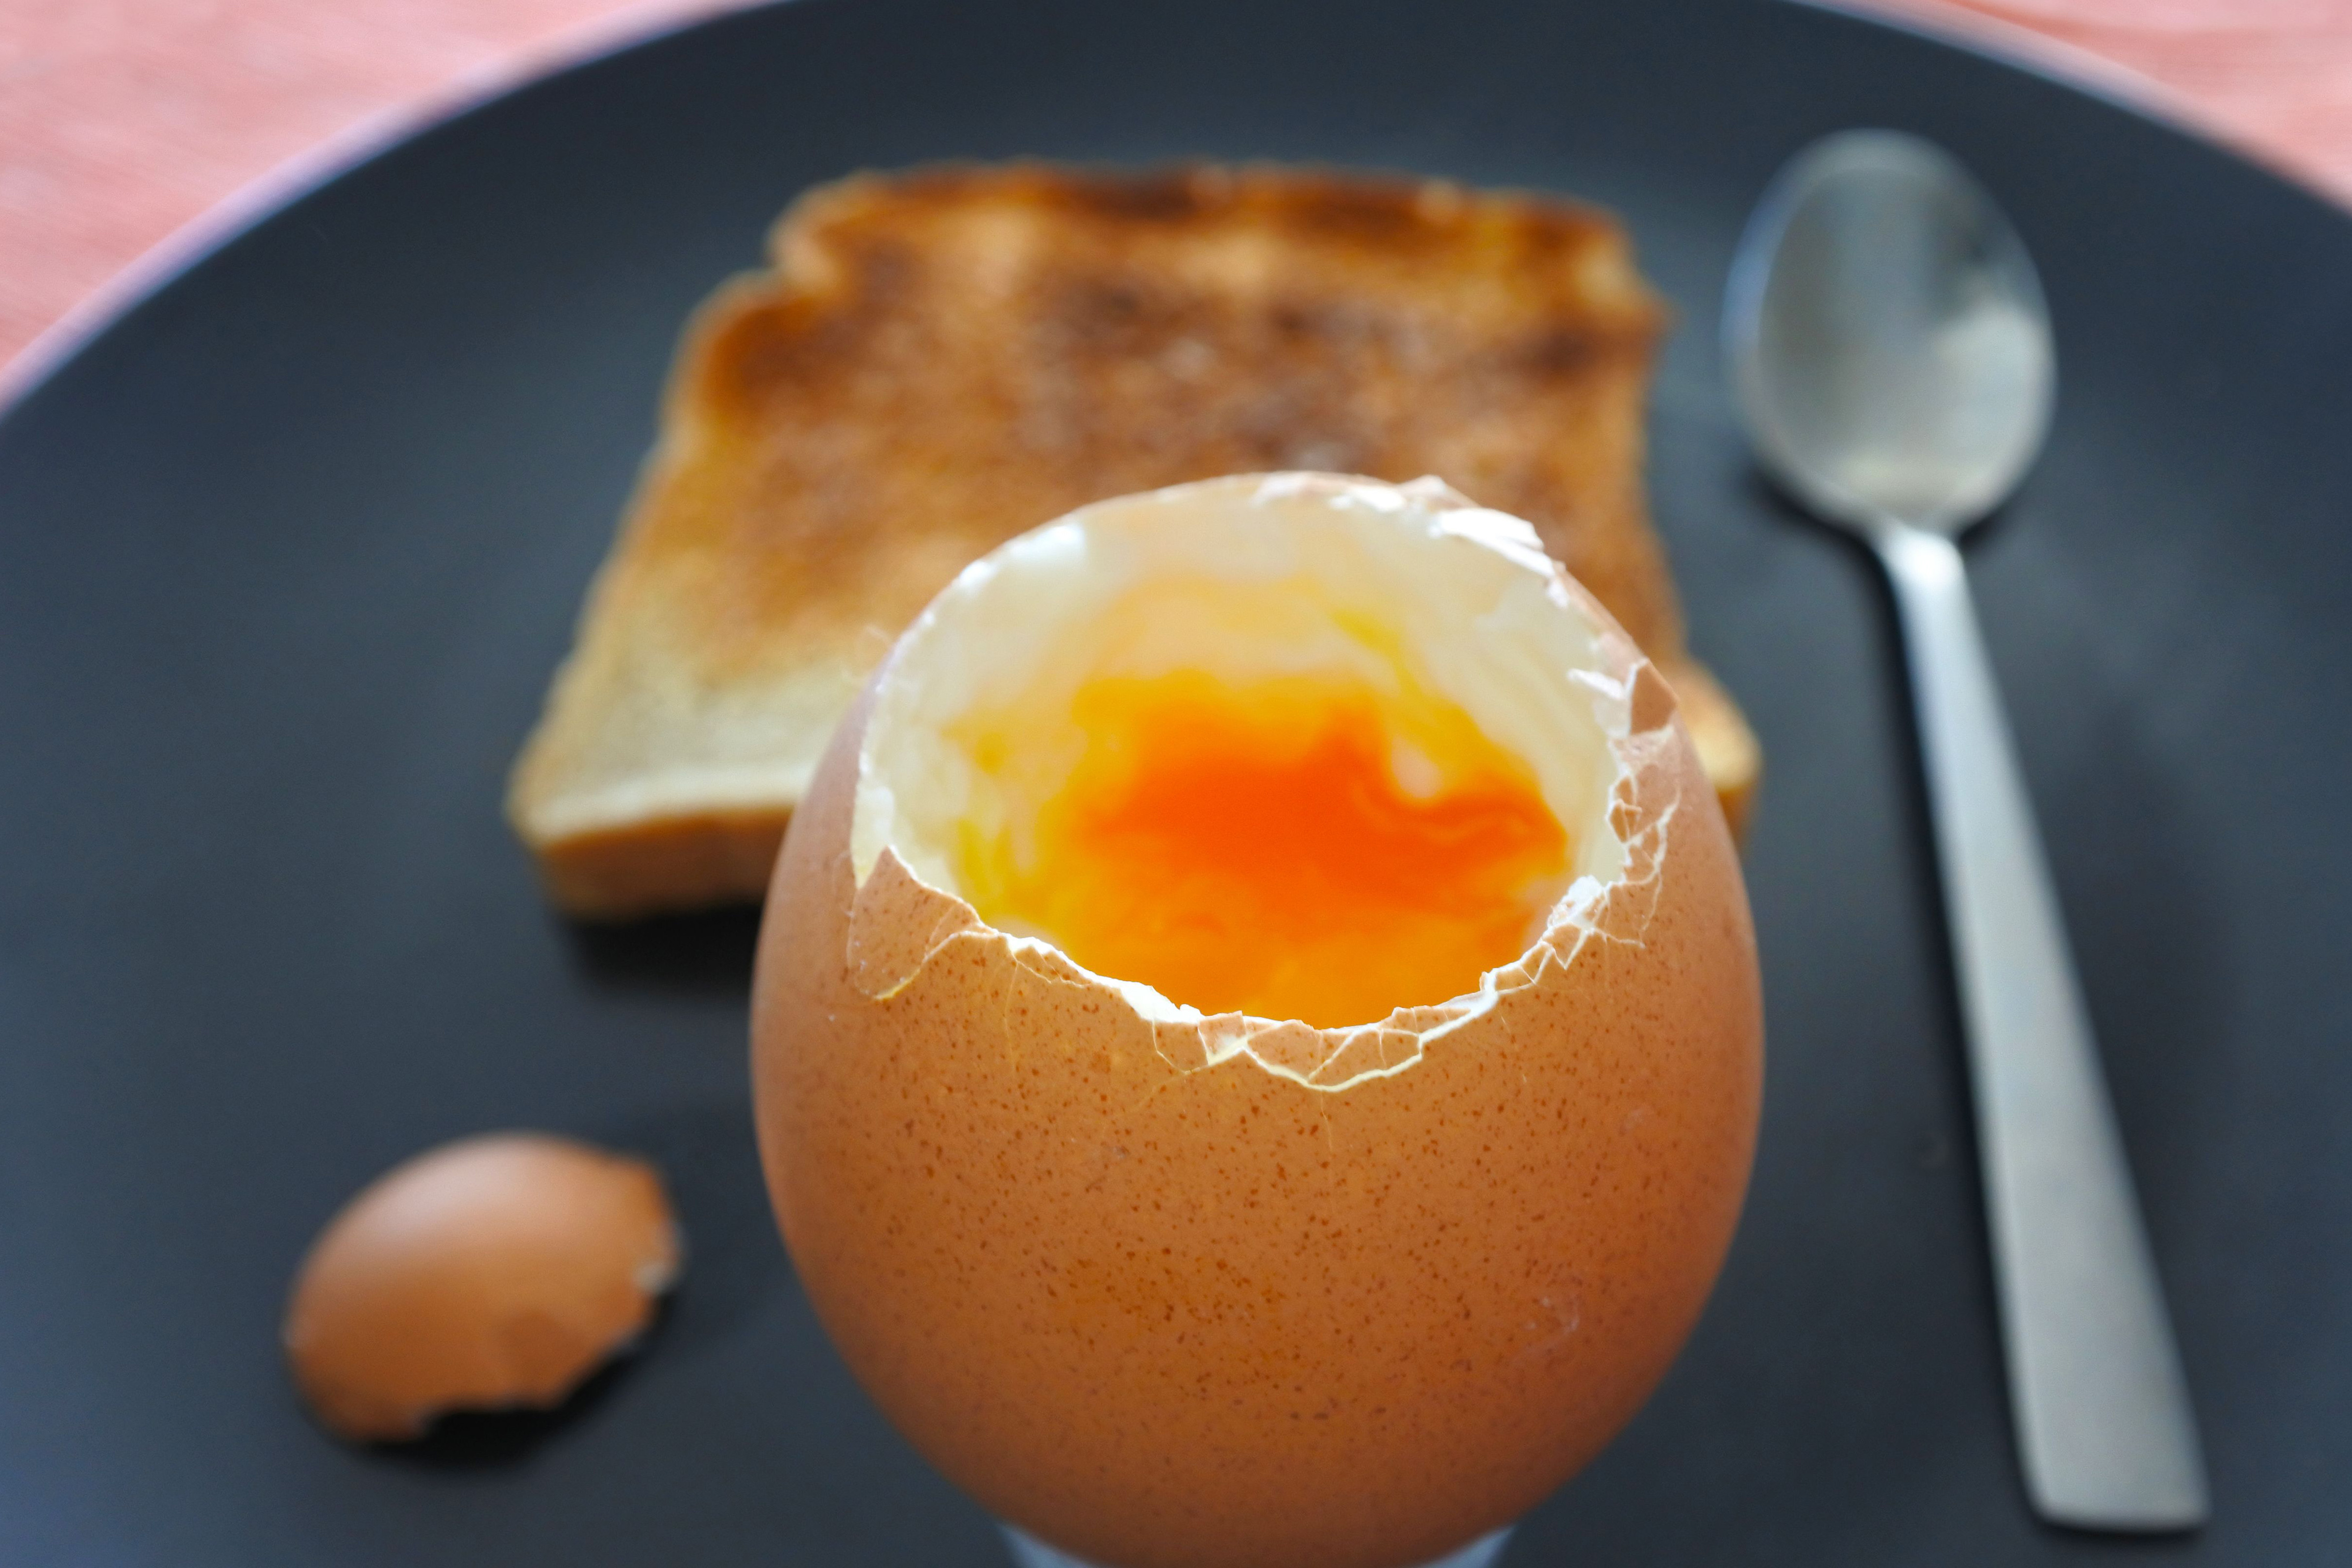 UK consumption is still lower than other EU countries, such as Austria, Germany and Hungary, according to statistics provided by the International Egg Commission. Photo: Chameleons Eye/REX/Shutterstock